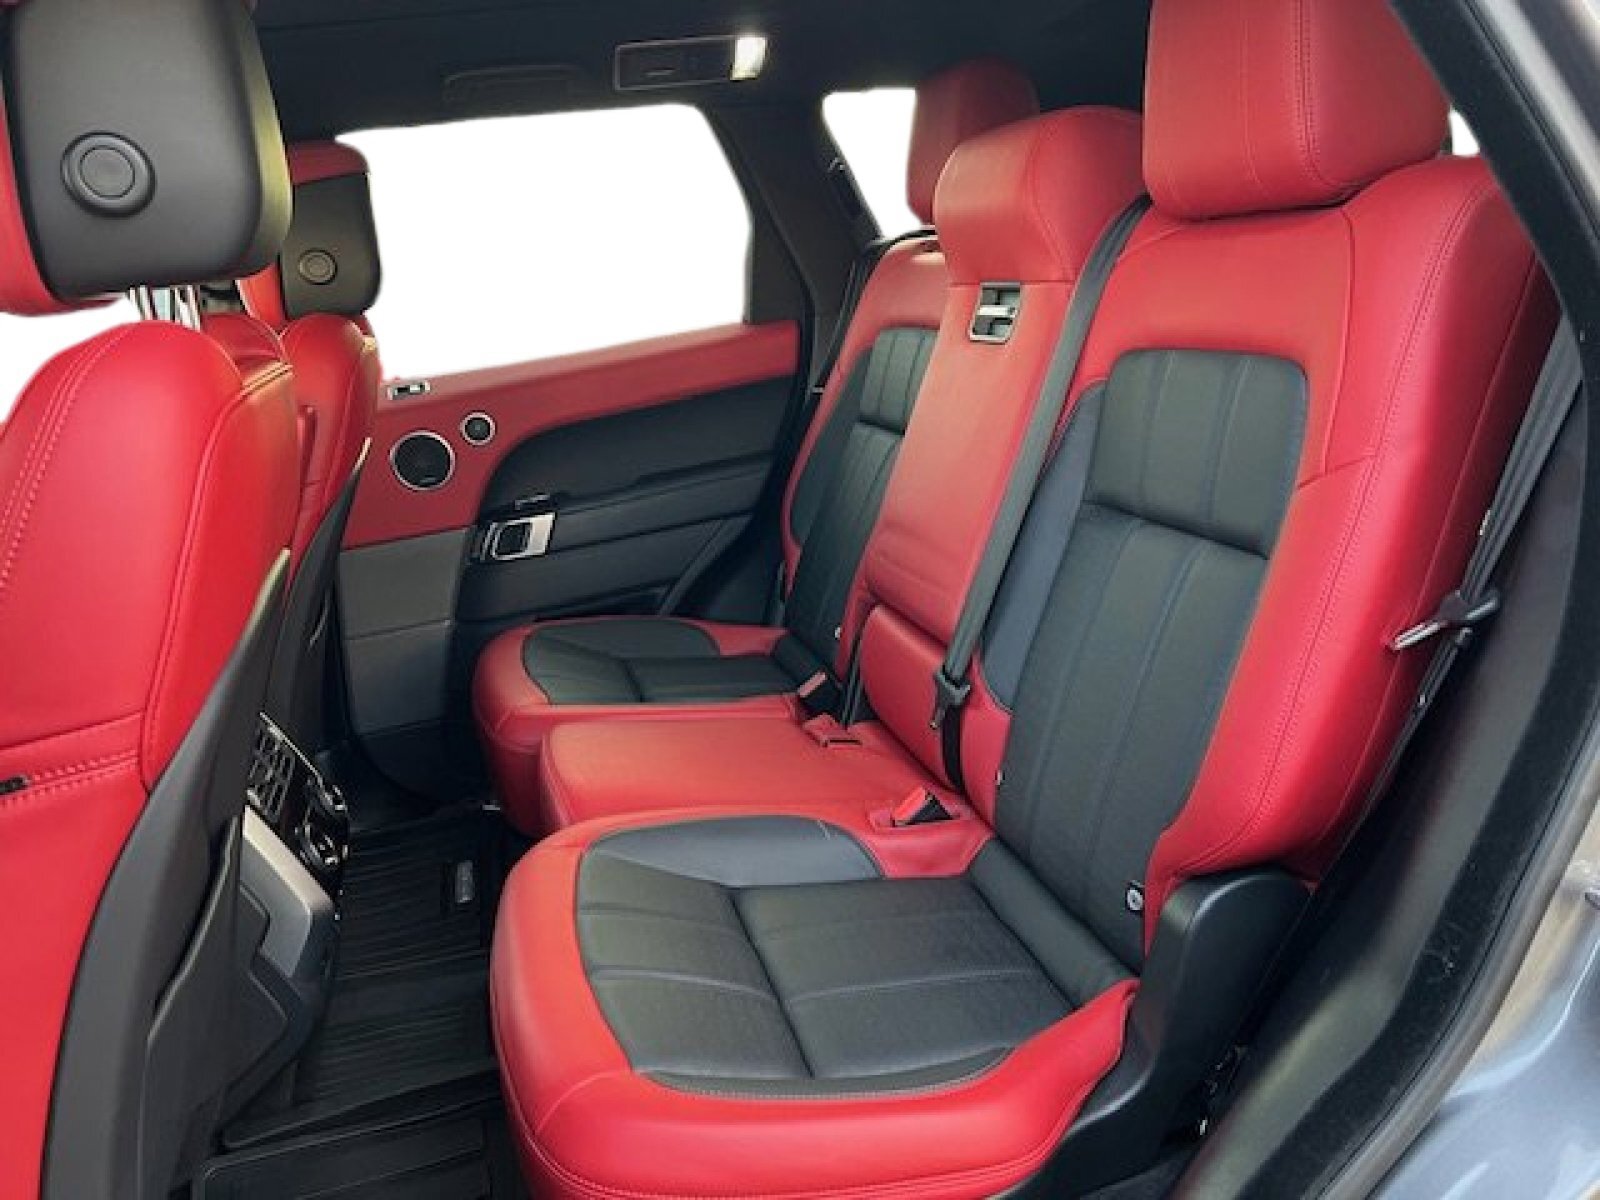 2019 Land Rover Range Rover Sport HSE DYNAMIC SUPERCHARGED RED INTERIOR